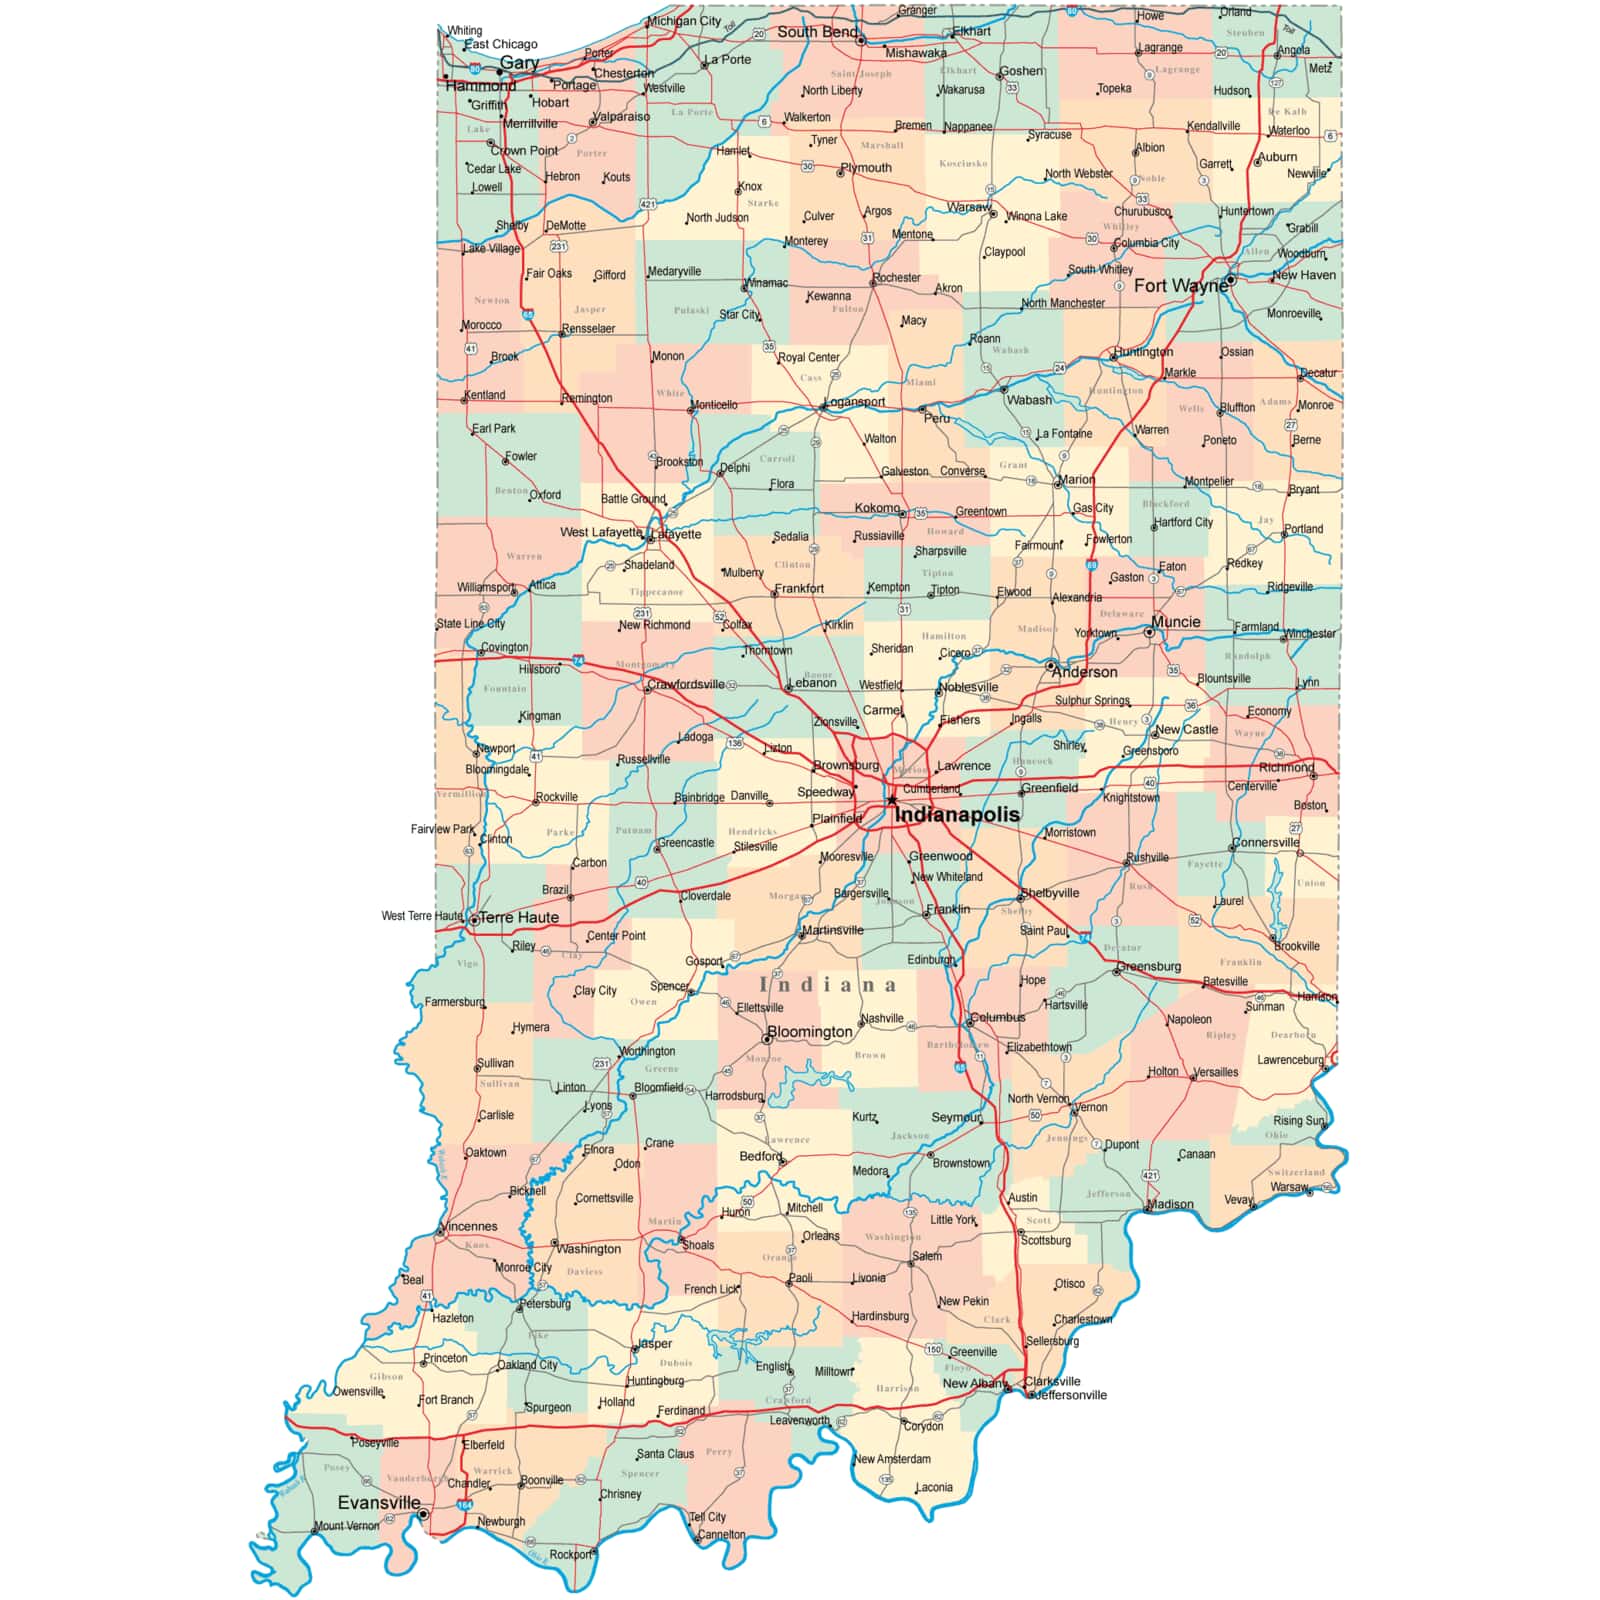 Indiana Road Map Square ?format=jpg&scale.option=fill&scale.width=1600&quality=60